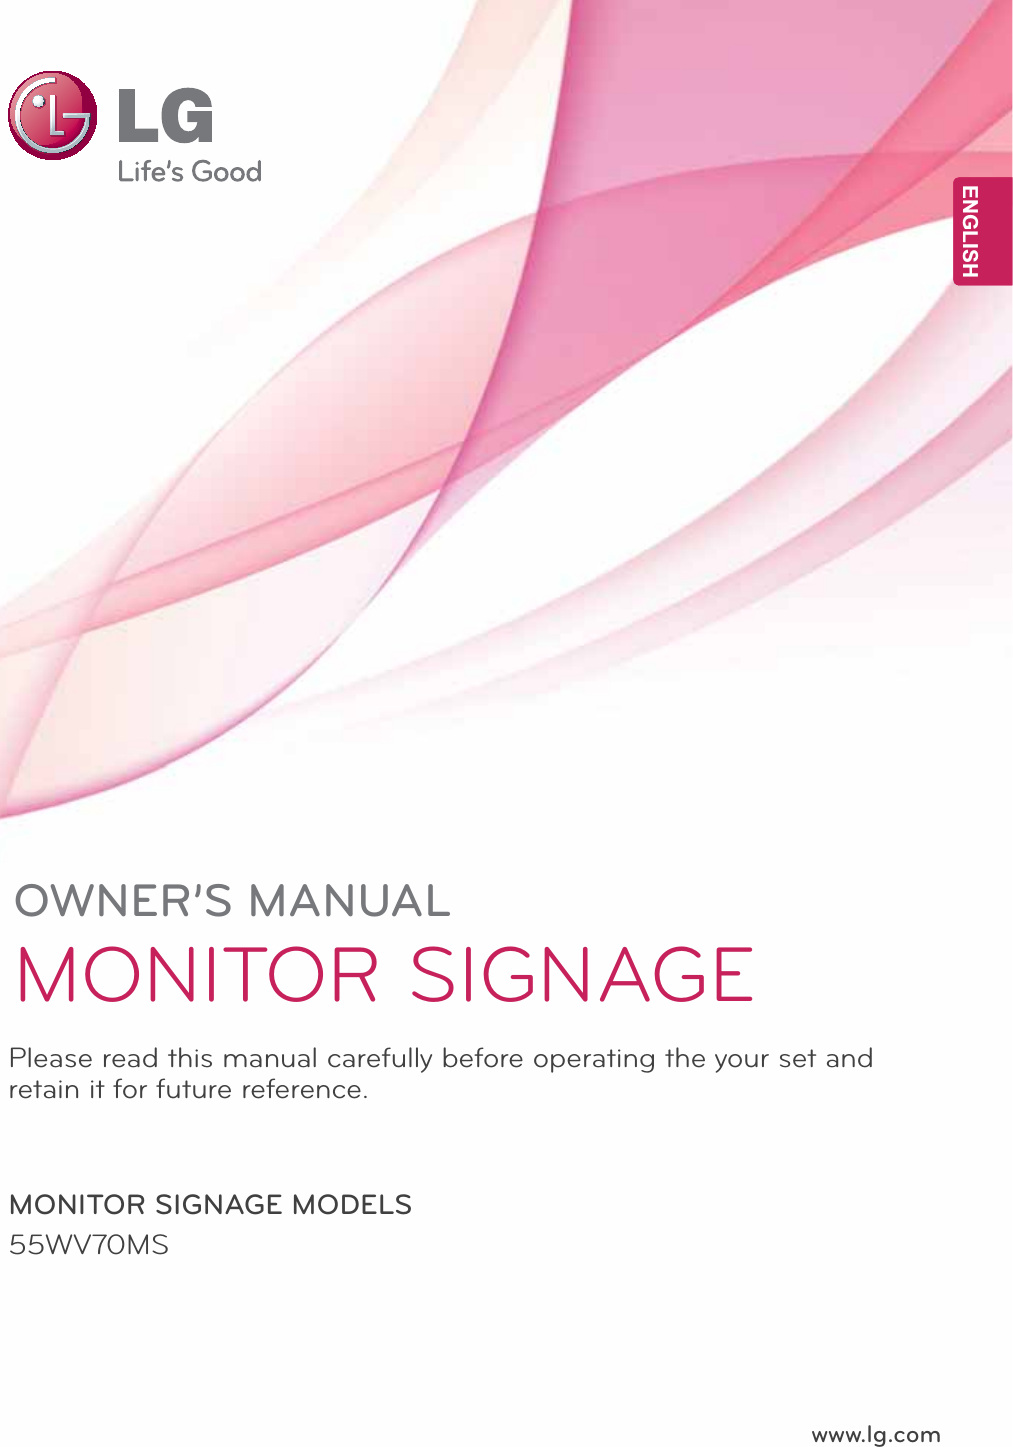 www.lg.comOWNER’S MANUALMONITOR SIGNAGE55WV70MSPlease read this manual carefully before operating the your set and retain it for future reference.MONITOR SIGNAGE MODELSENGENGLISH